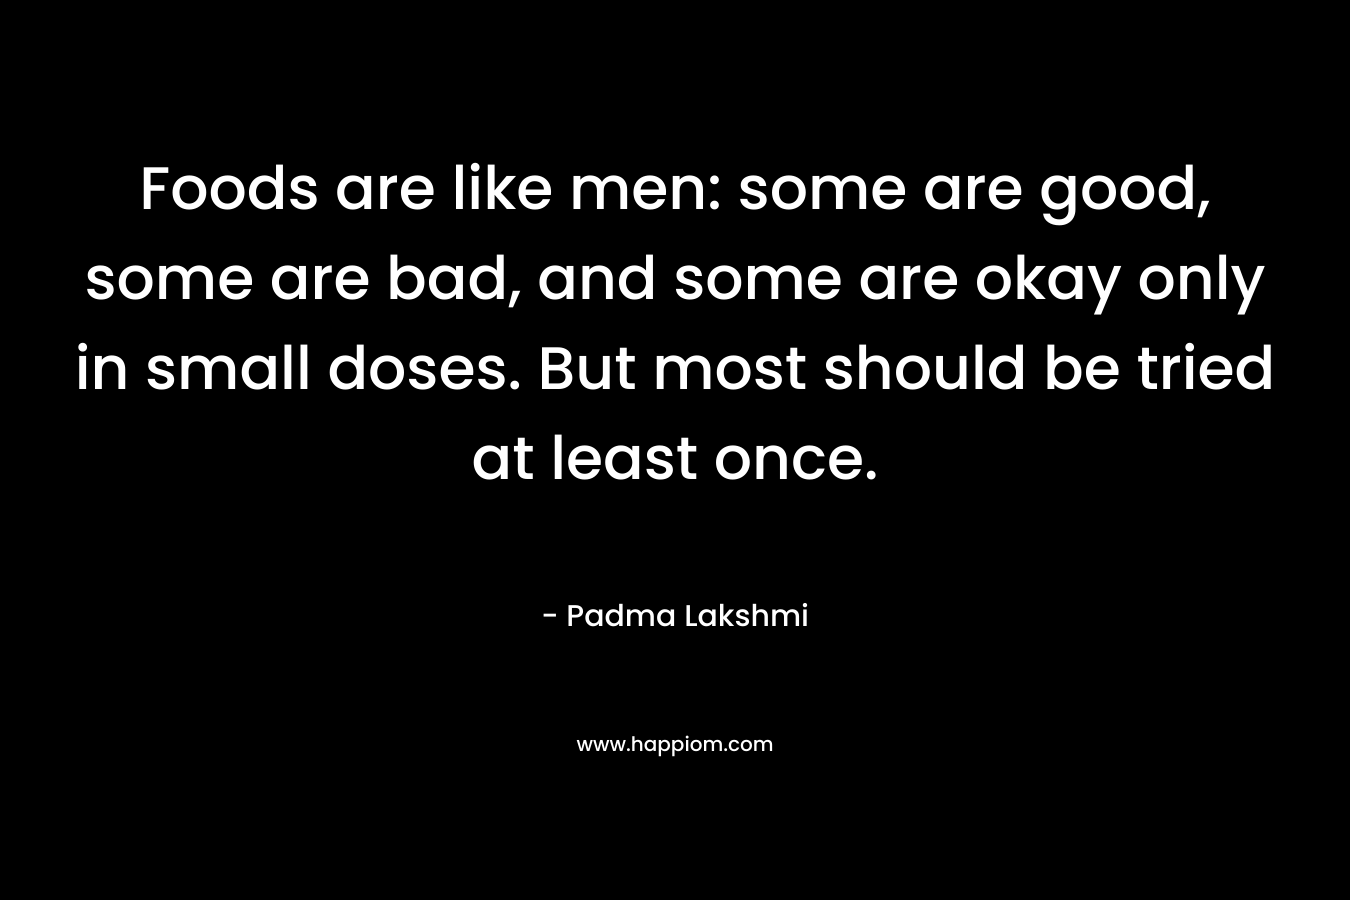 Foods are like men: some are good, some are bad, and some are okay only in small doses. But most should be tried at least once. – Padma Lakshmi